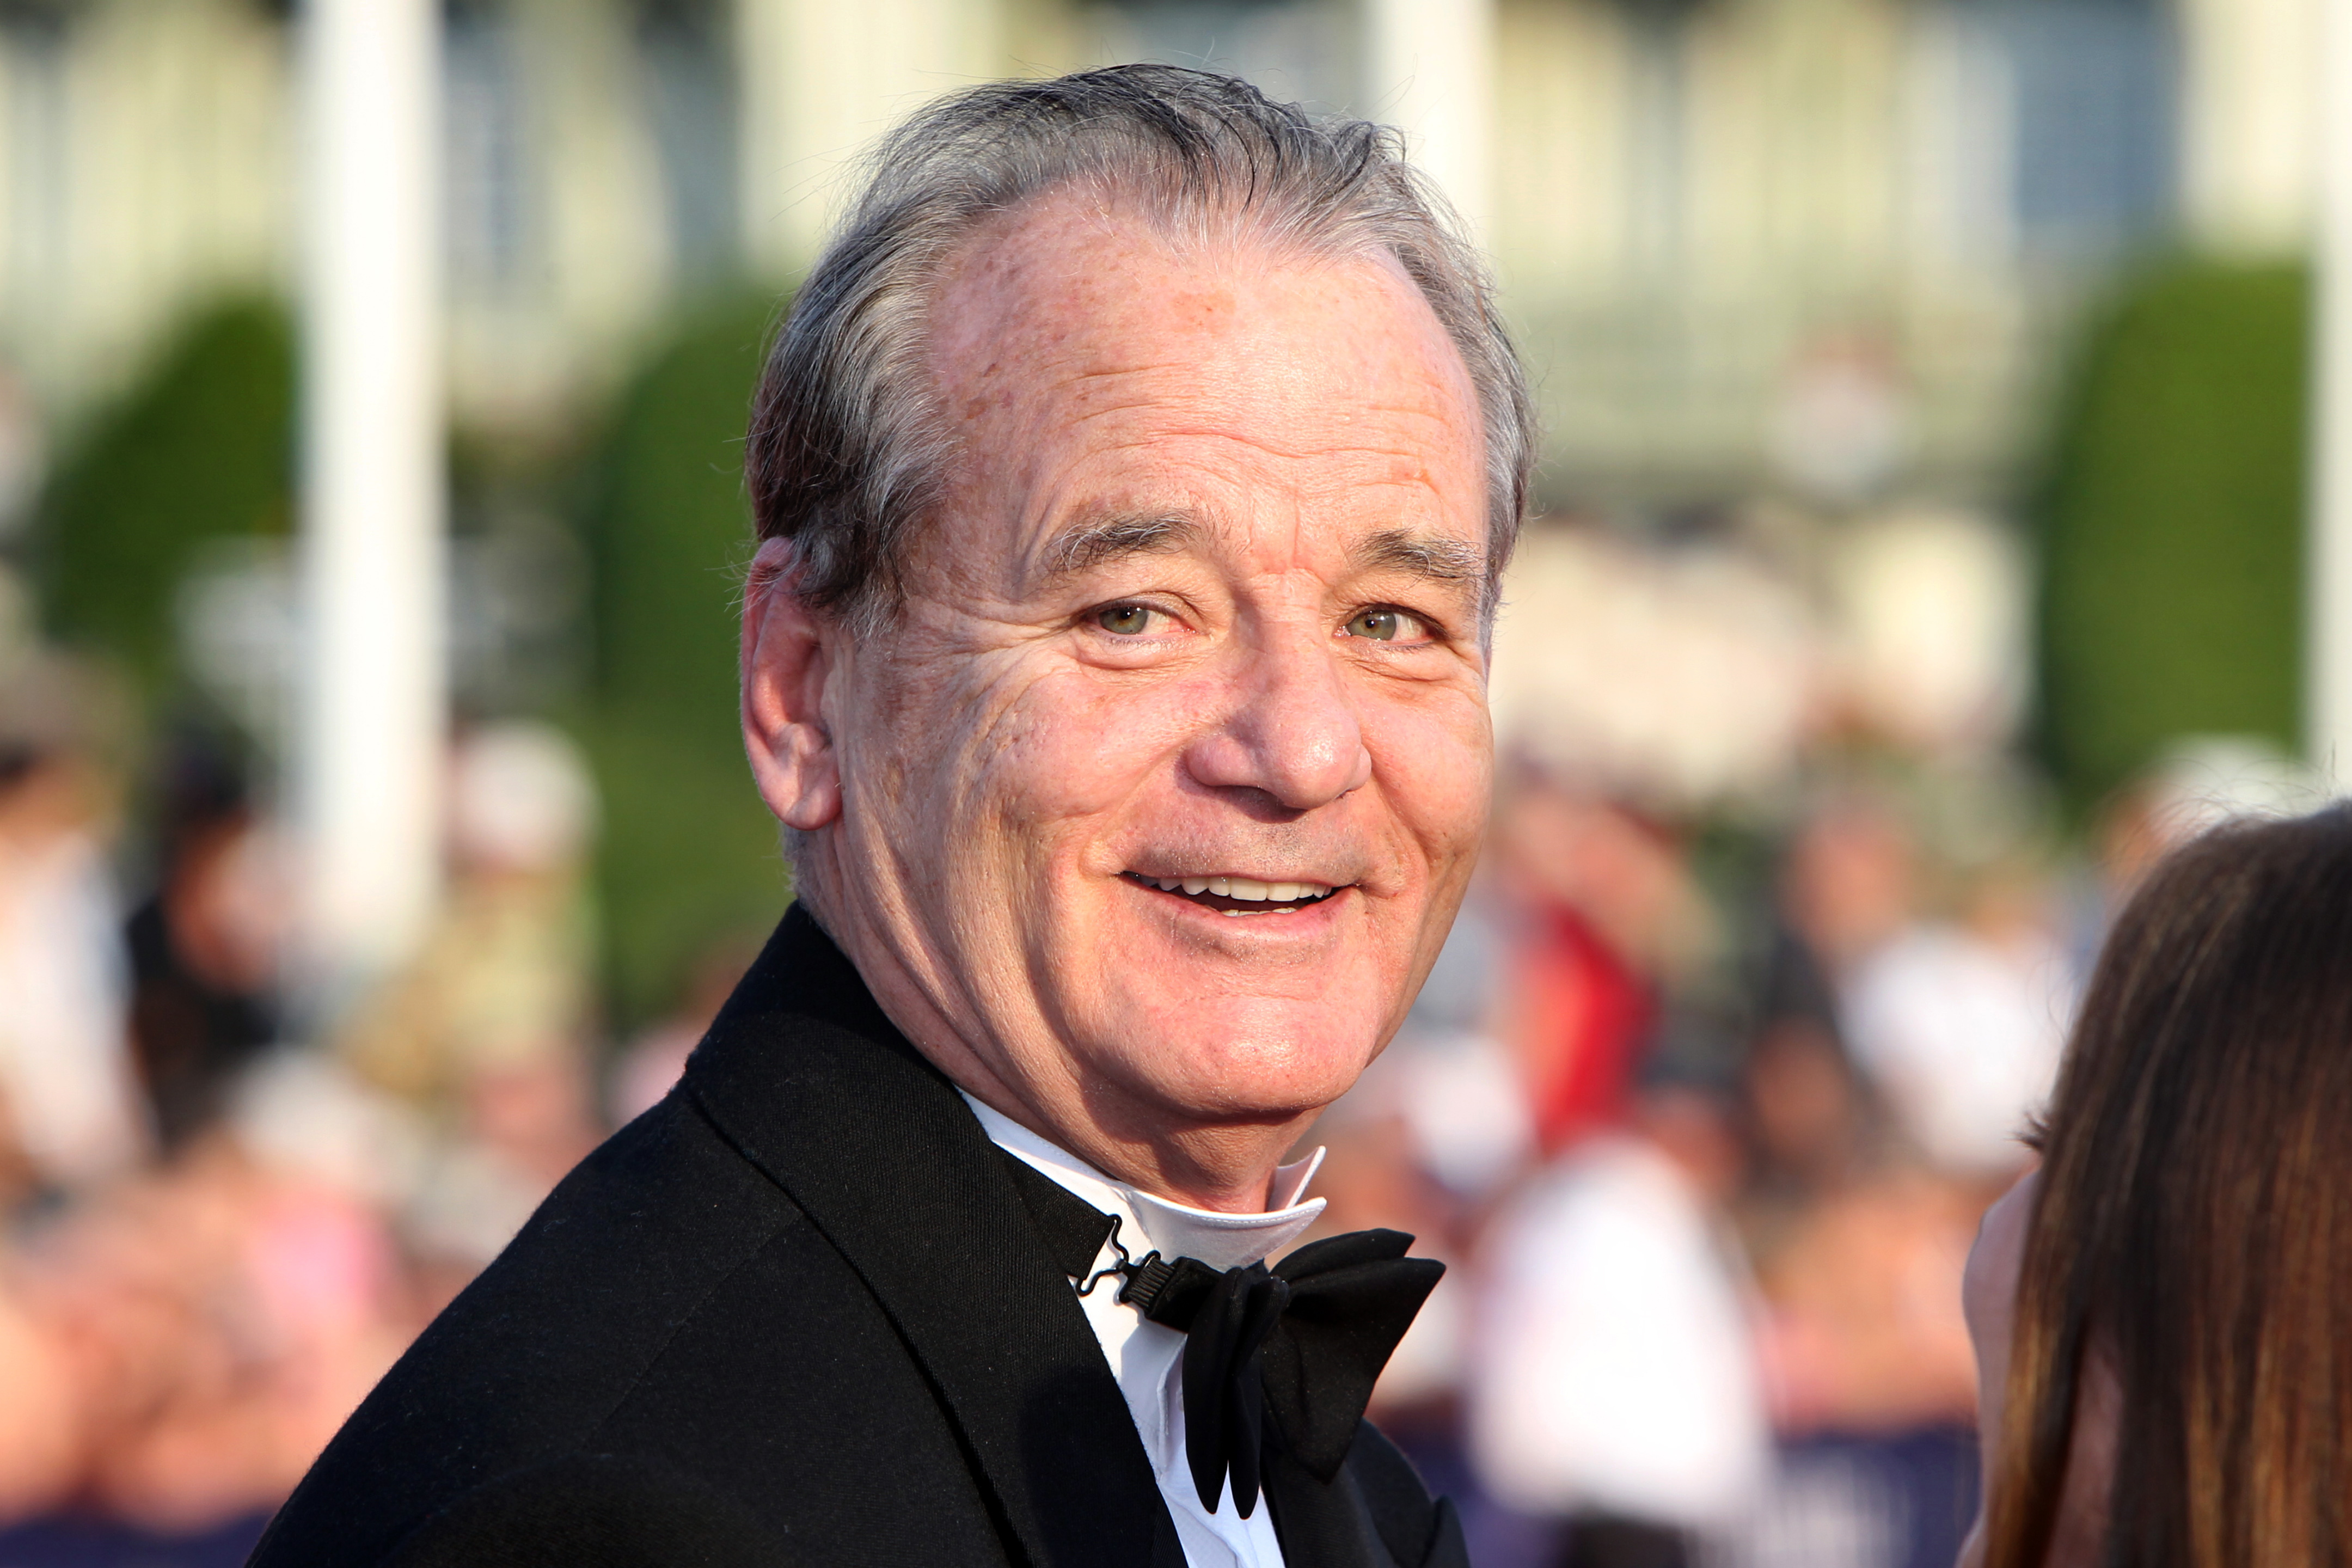 Bill Murray arrives for the screening of the movie 'La couleur des sentiments', at the 37th U.S .Film Festival, in Deauville, France, on Sept. 2, 2011. (Kenzo Tribouillard—AFP/Getty Images)